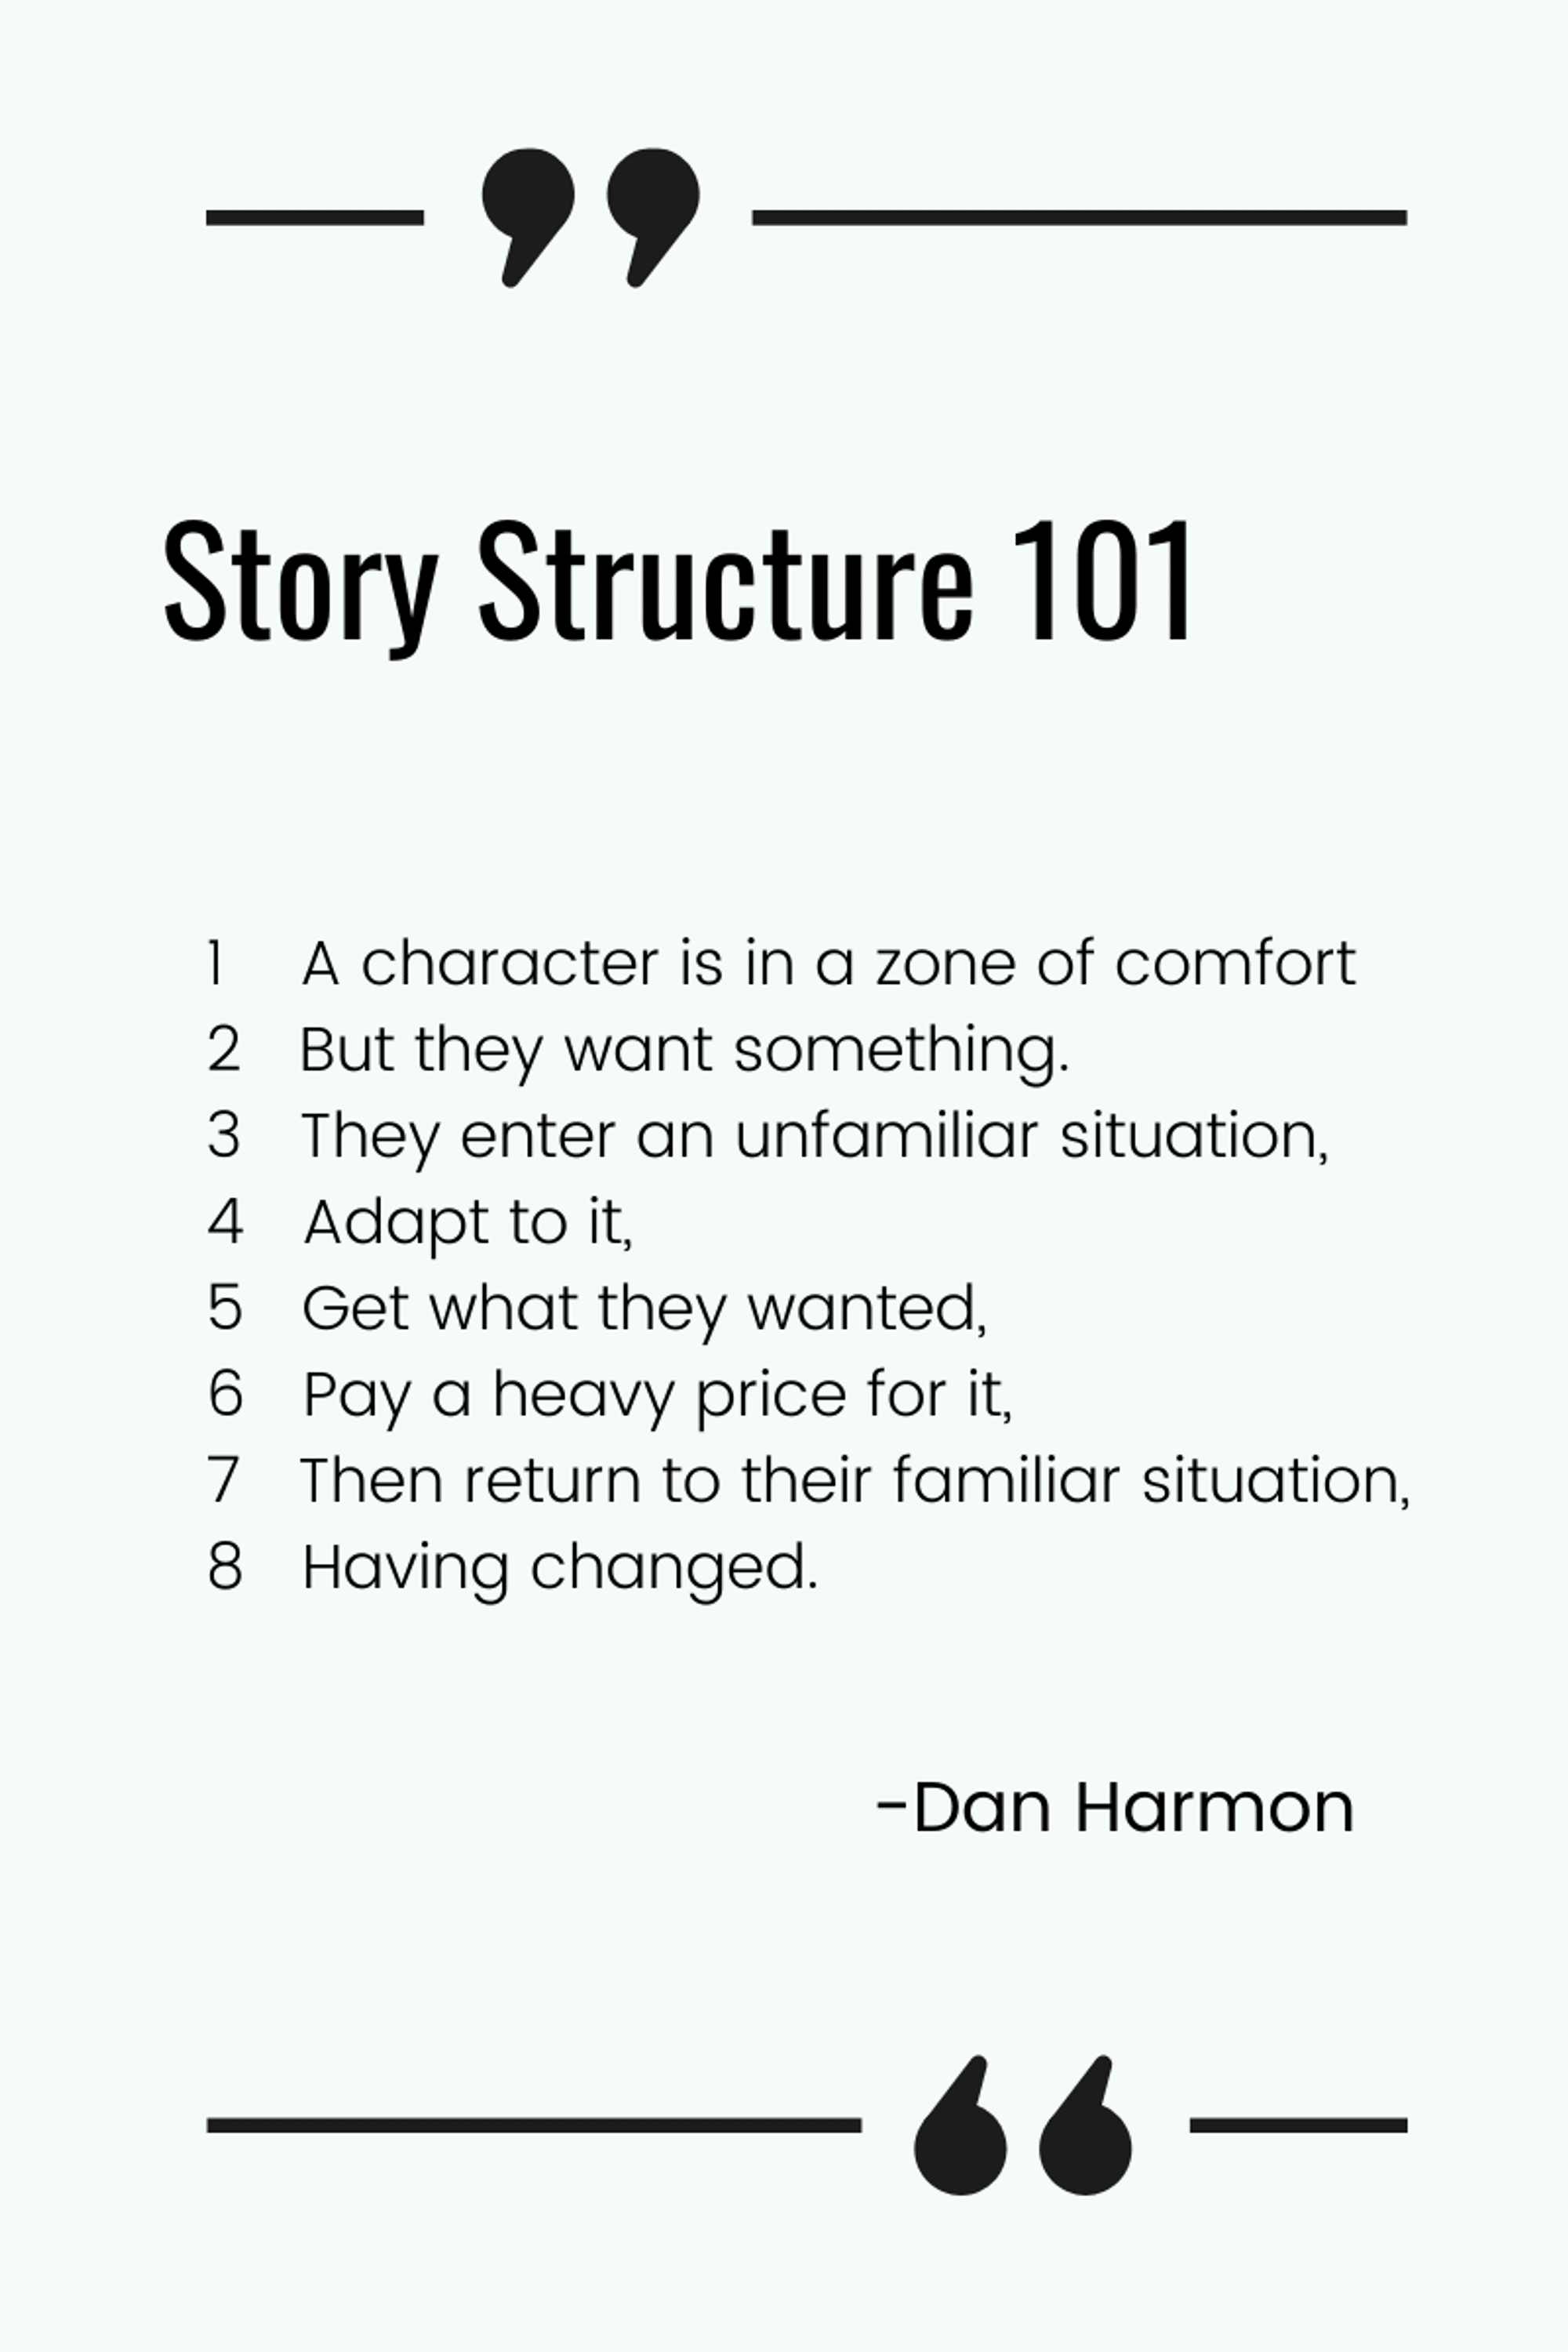 Story Structure 101 - quote from Dan Harmon